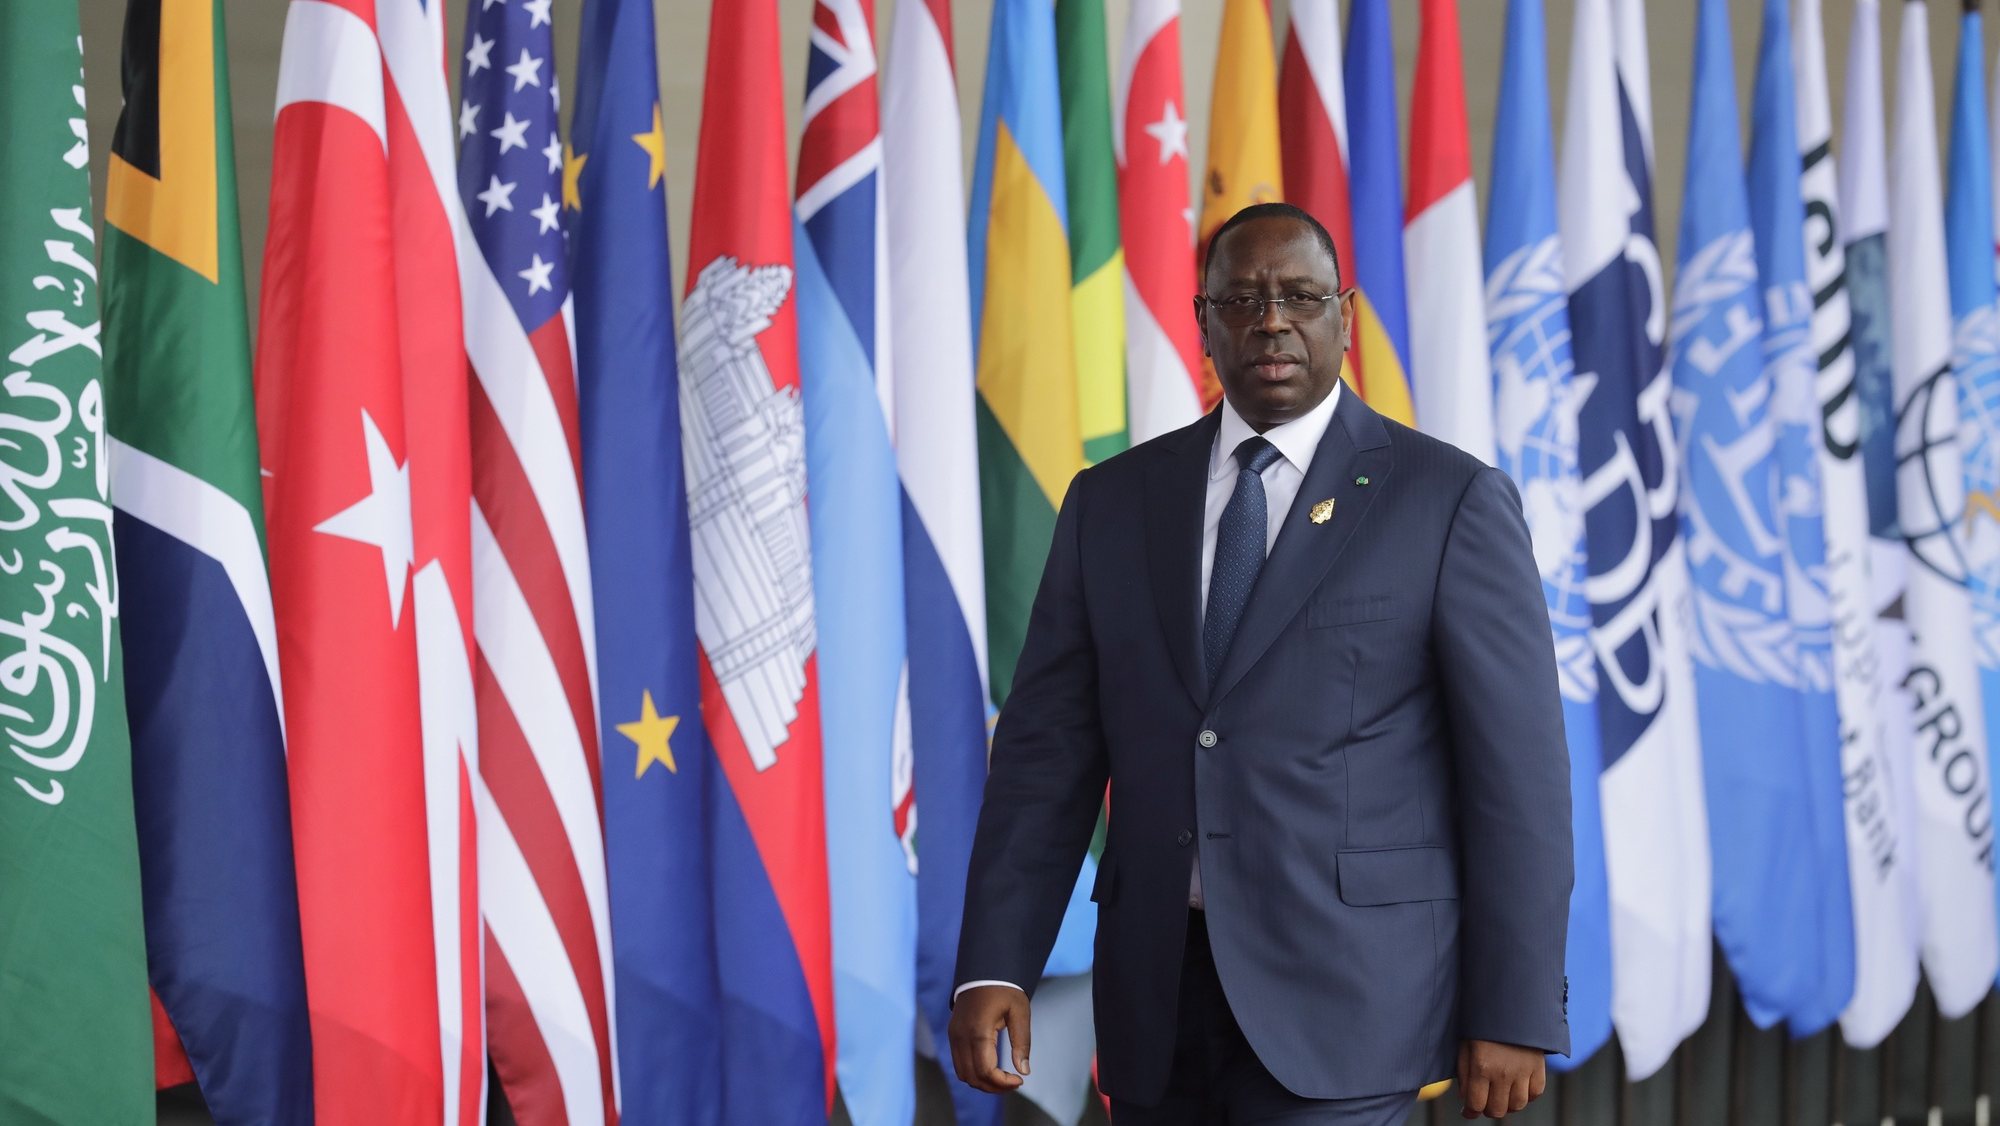 epa10306245 Senegal President Macky Sall arrives for the G20 Leaders Summit in Bali, Indonesia, 15 November 2022. The 17th Group of Twenty (G20) Heads of State and Government Summit runs from 15 to 16 November 2022.  EPA/MAST IRHAM / POOL